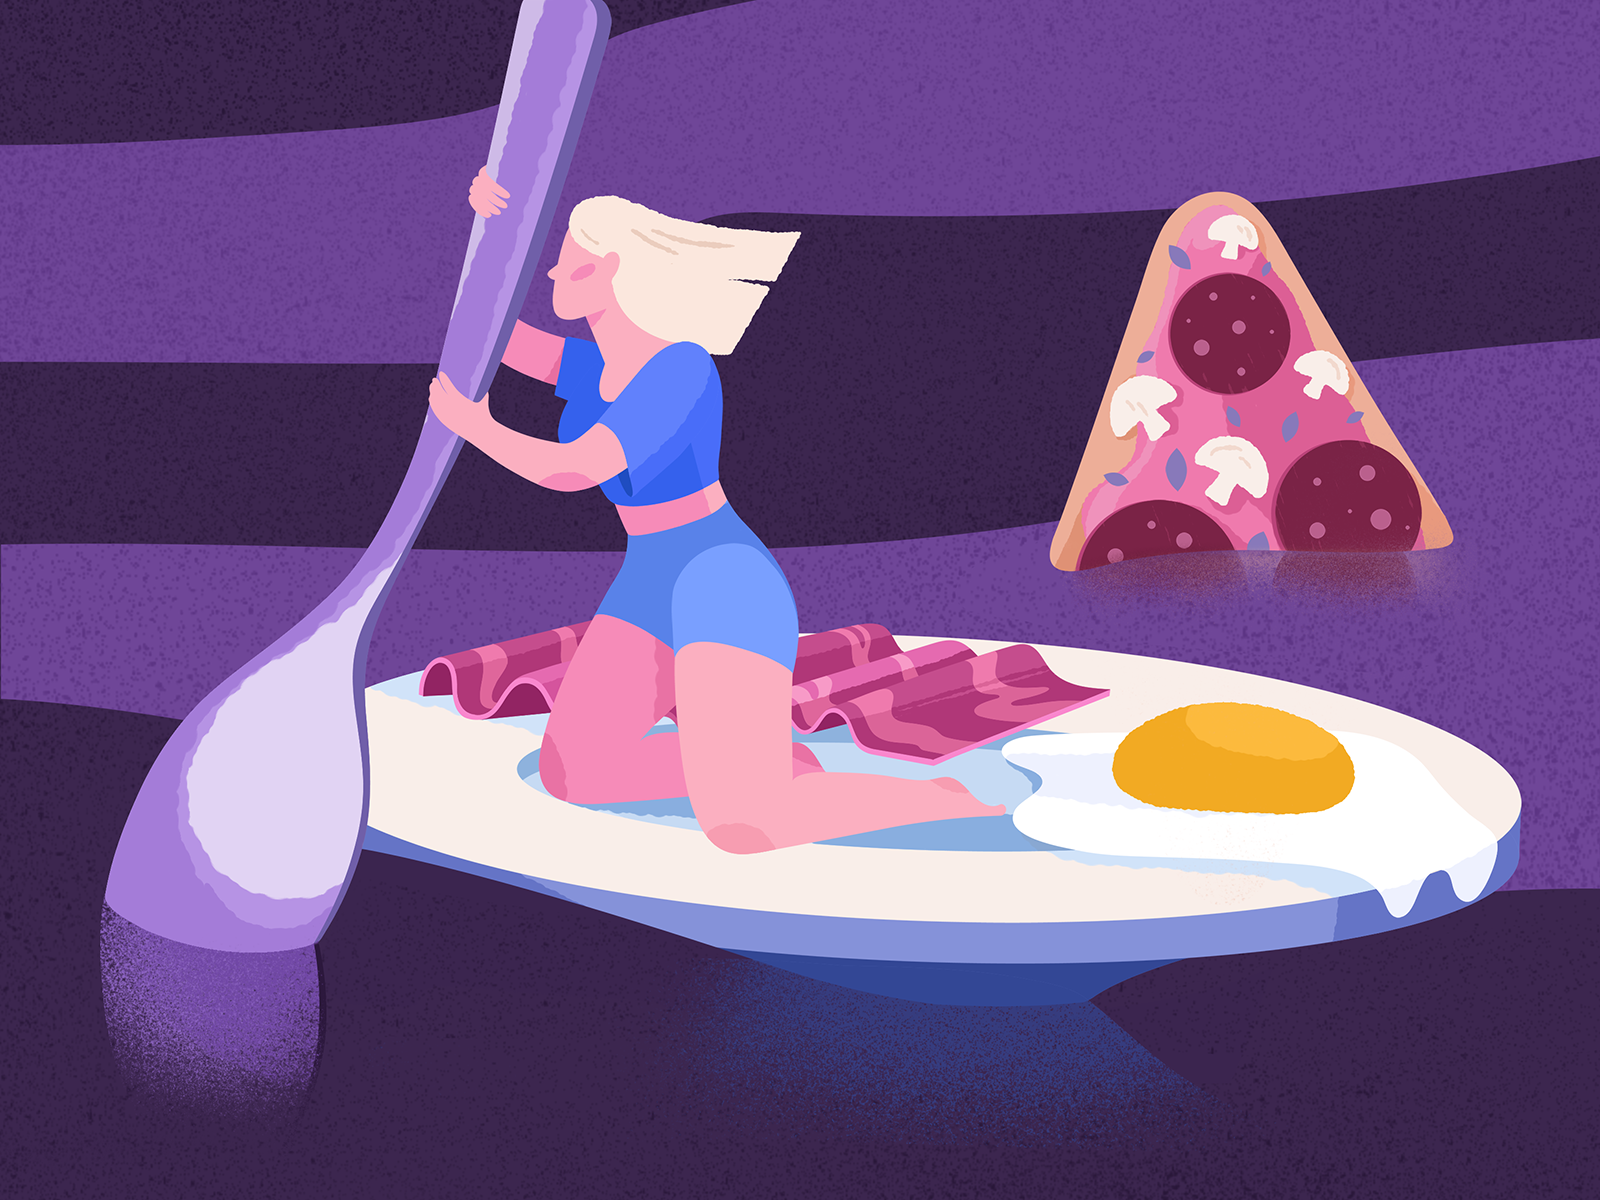 Our Food Choices Impact Global Warming. adobe illustrator adobe photoshop blue design inspiration enviroment fried egg girl global warming grain grainy illustration illustrator mindfulness olga hashim pink pizza plate purple spoon texture